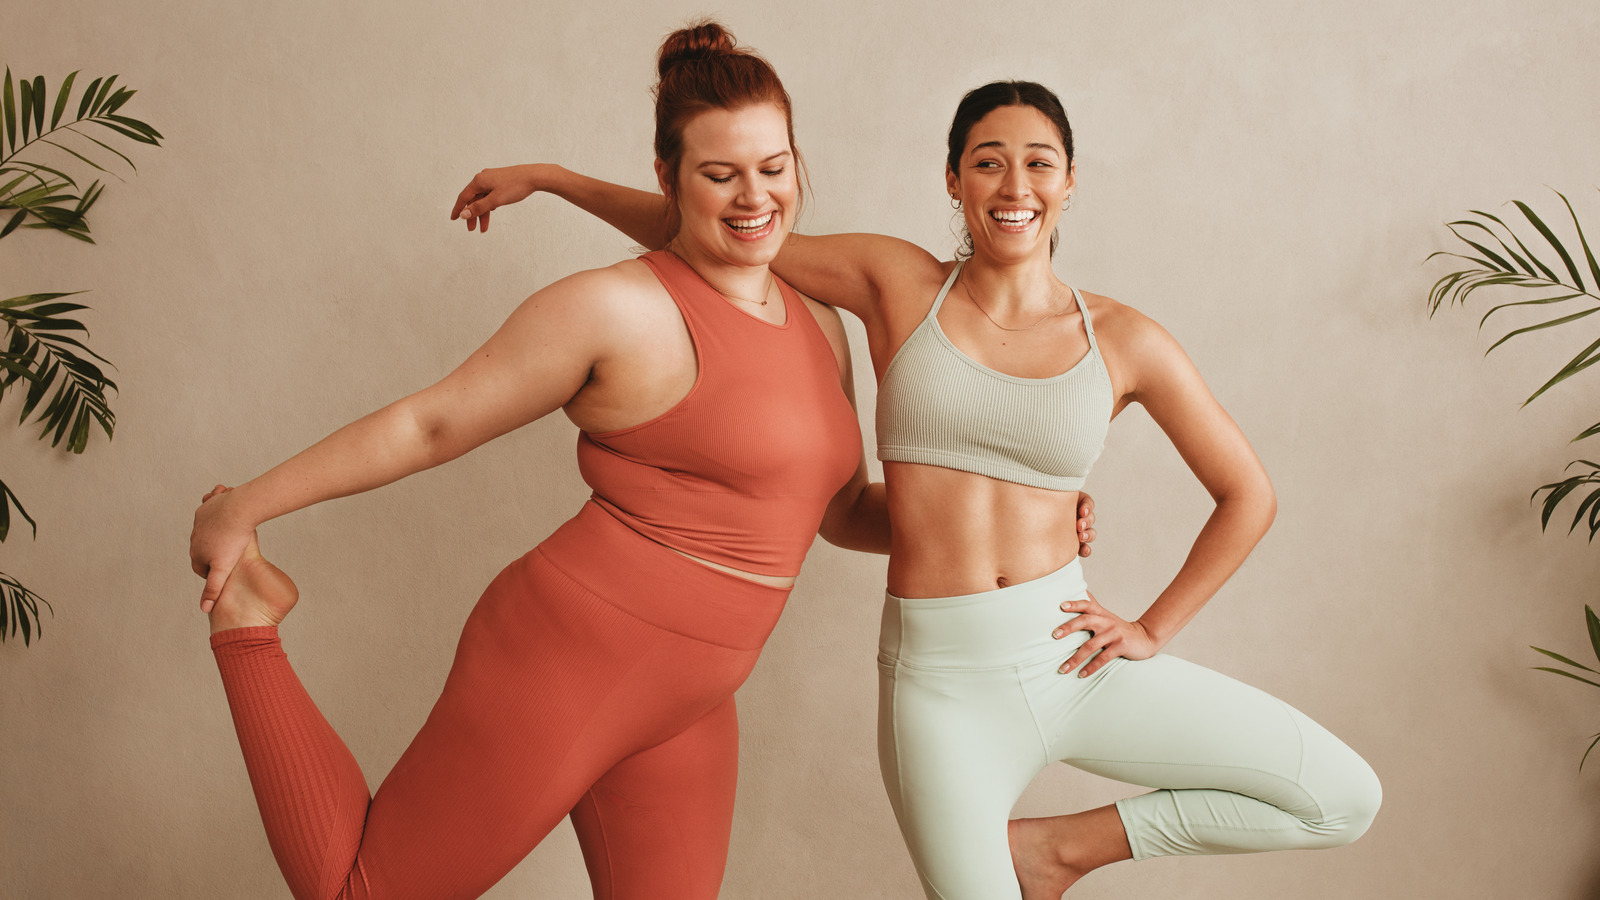 Shop Women's and Men's Activewear at Fabletics' New Store - Hour